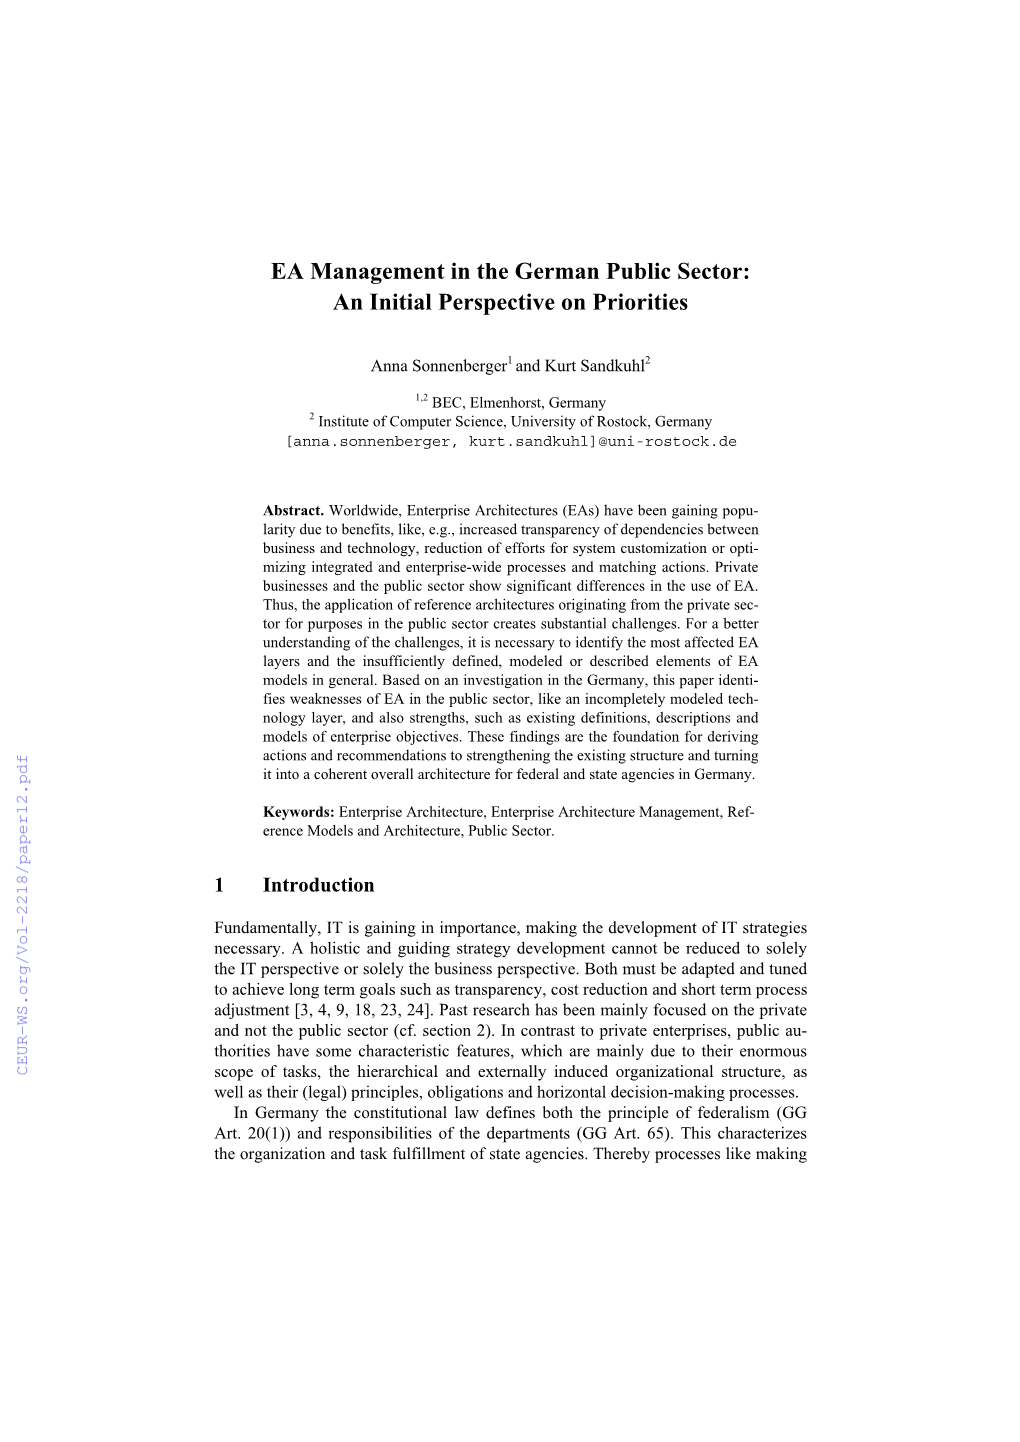 EA Management in the German Public Sector: an Initial Perspective on Priorities